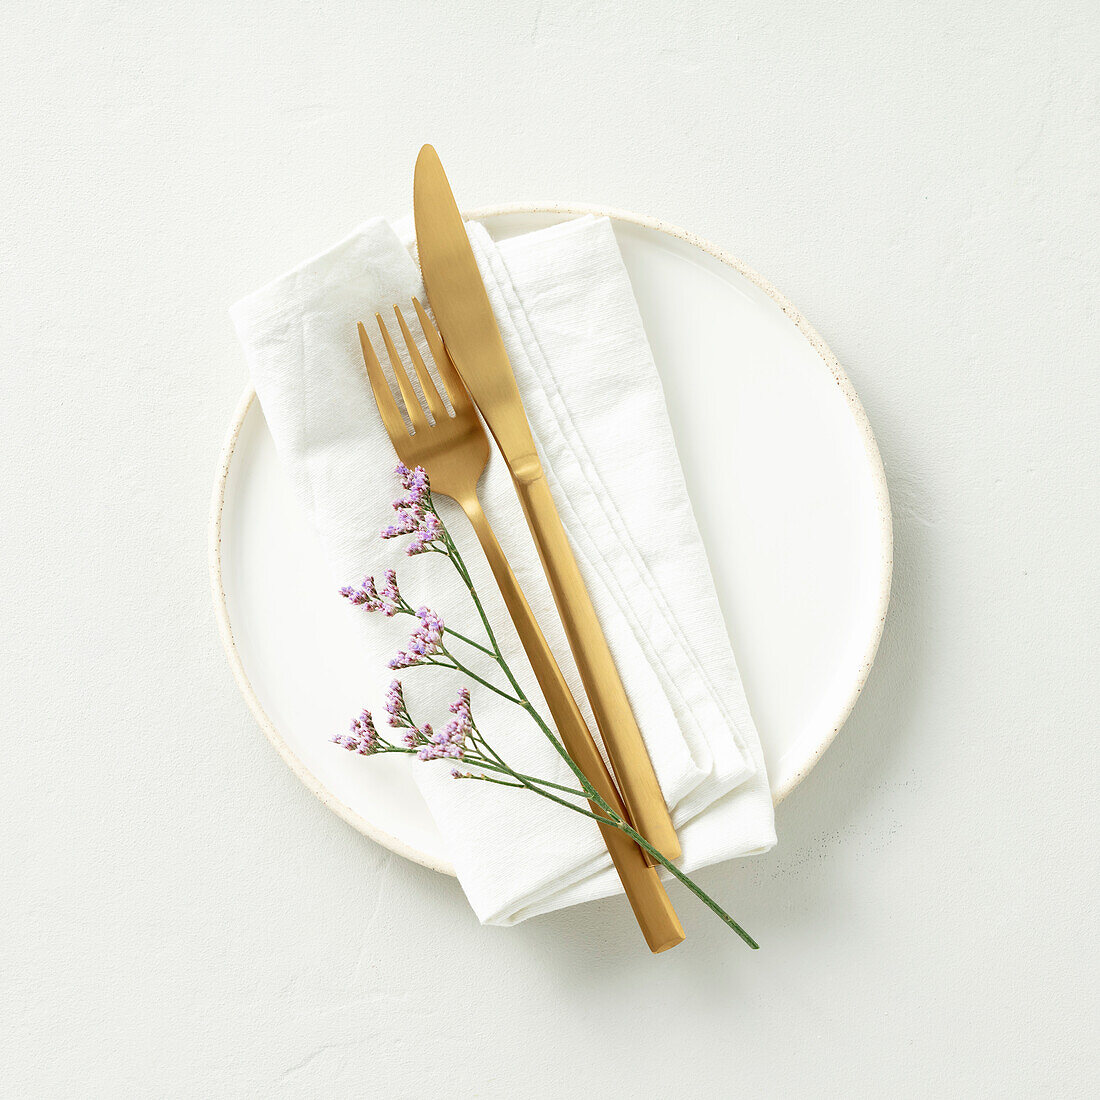 Gold cutlery with eucalyptus branches on a white plate with napkin against a light grey background. Minimalist design. Space for copying